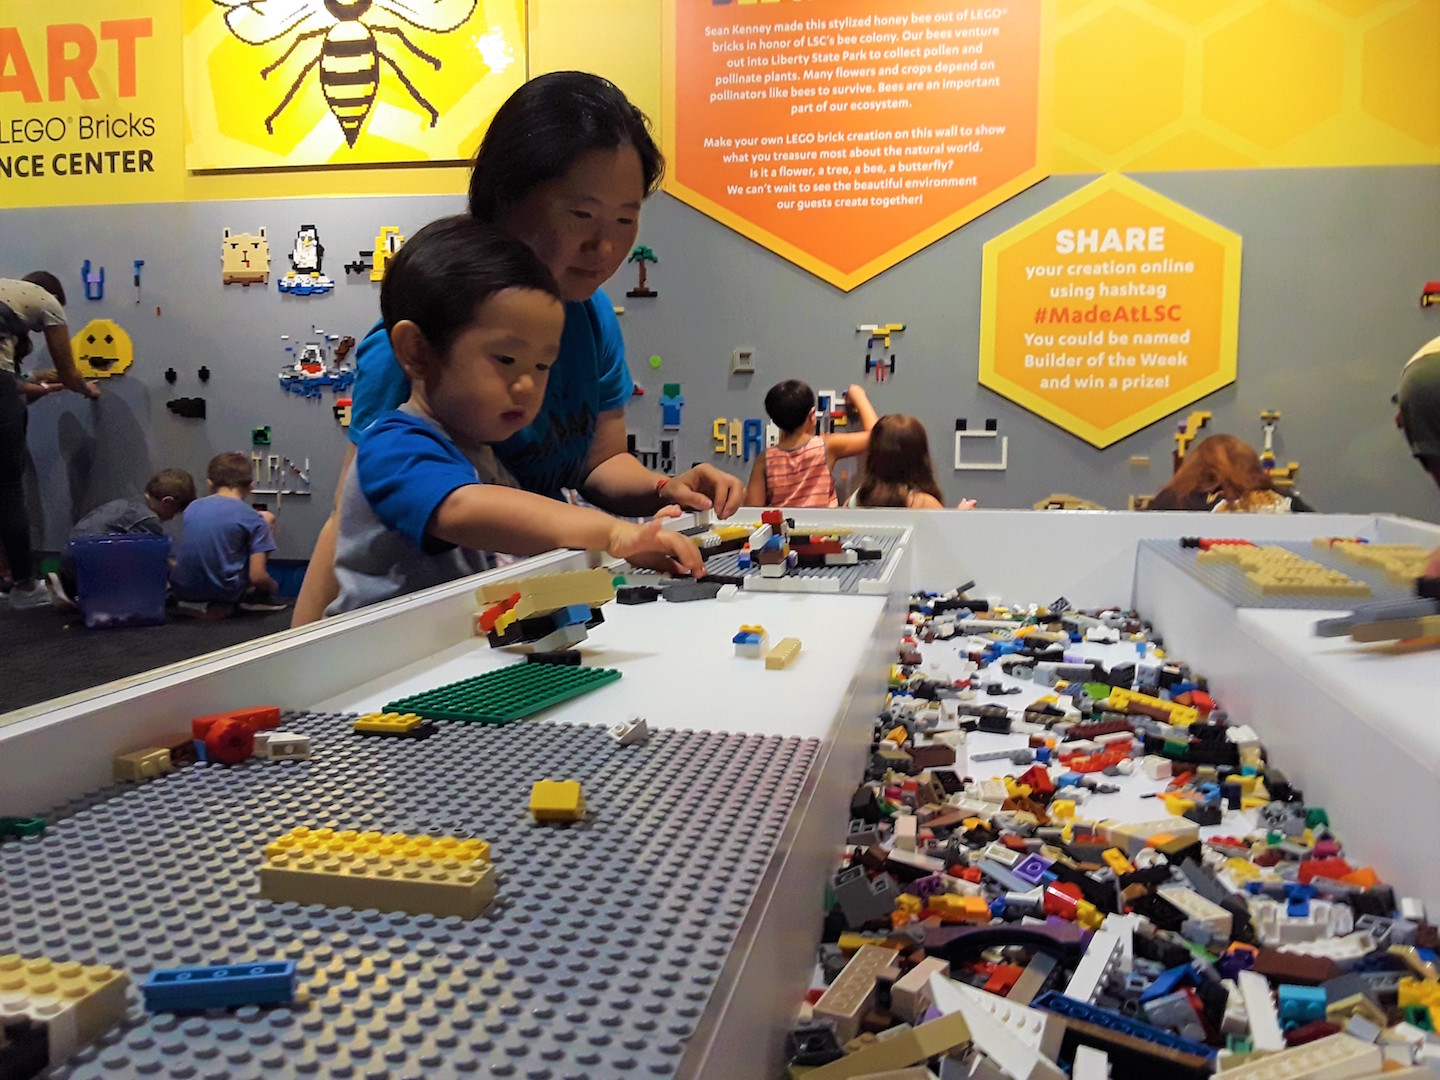 Boy and mother making creations with LEGO pieces